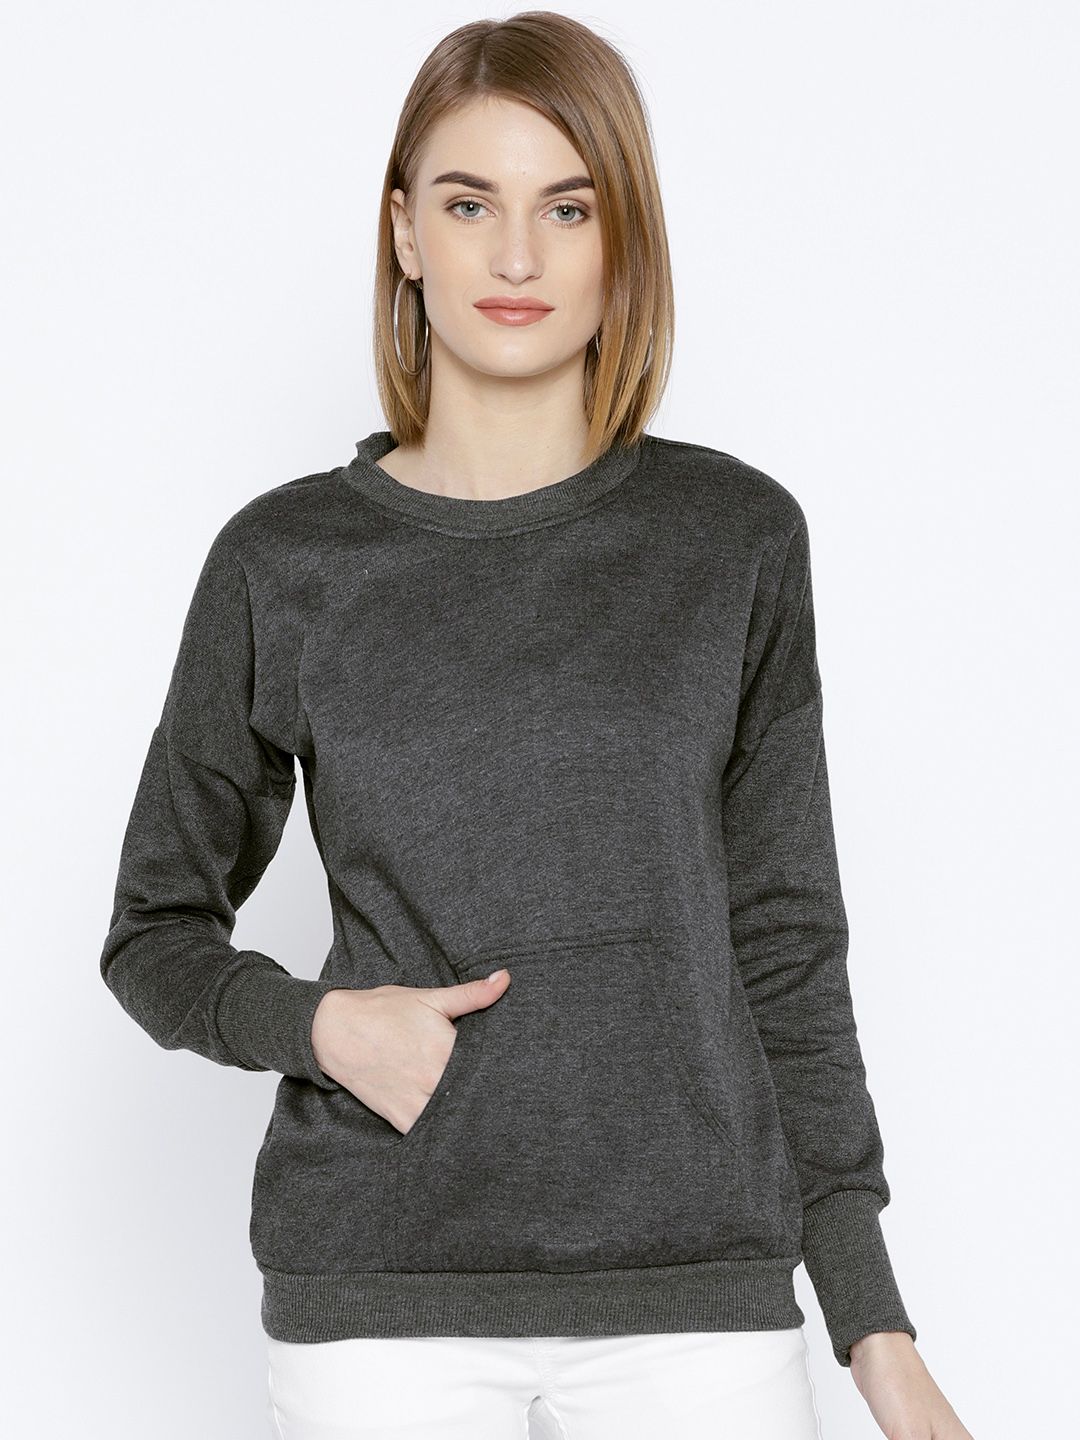 Belle Fille Women Charcoal Grey Solid Sweatshirt with Tie-Up Detail Price in India